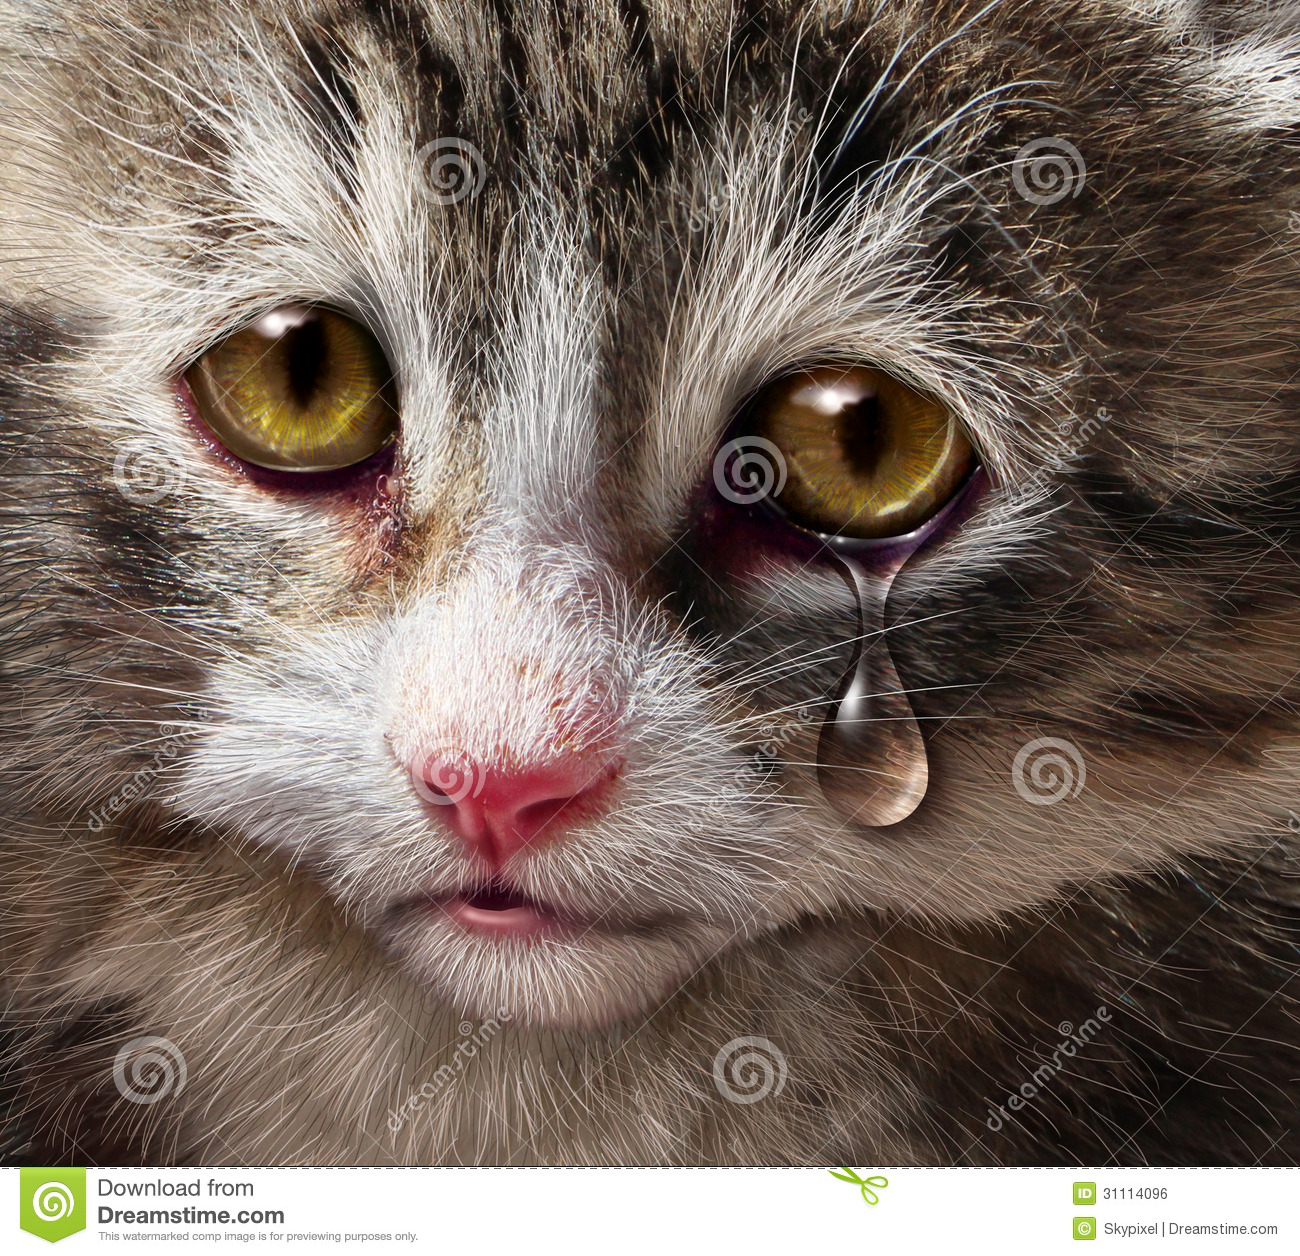 Animal Abuse And Pet Cruelty And Neglect With A Sad Crying Kitten Cat